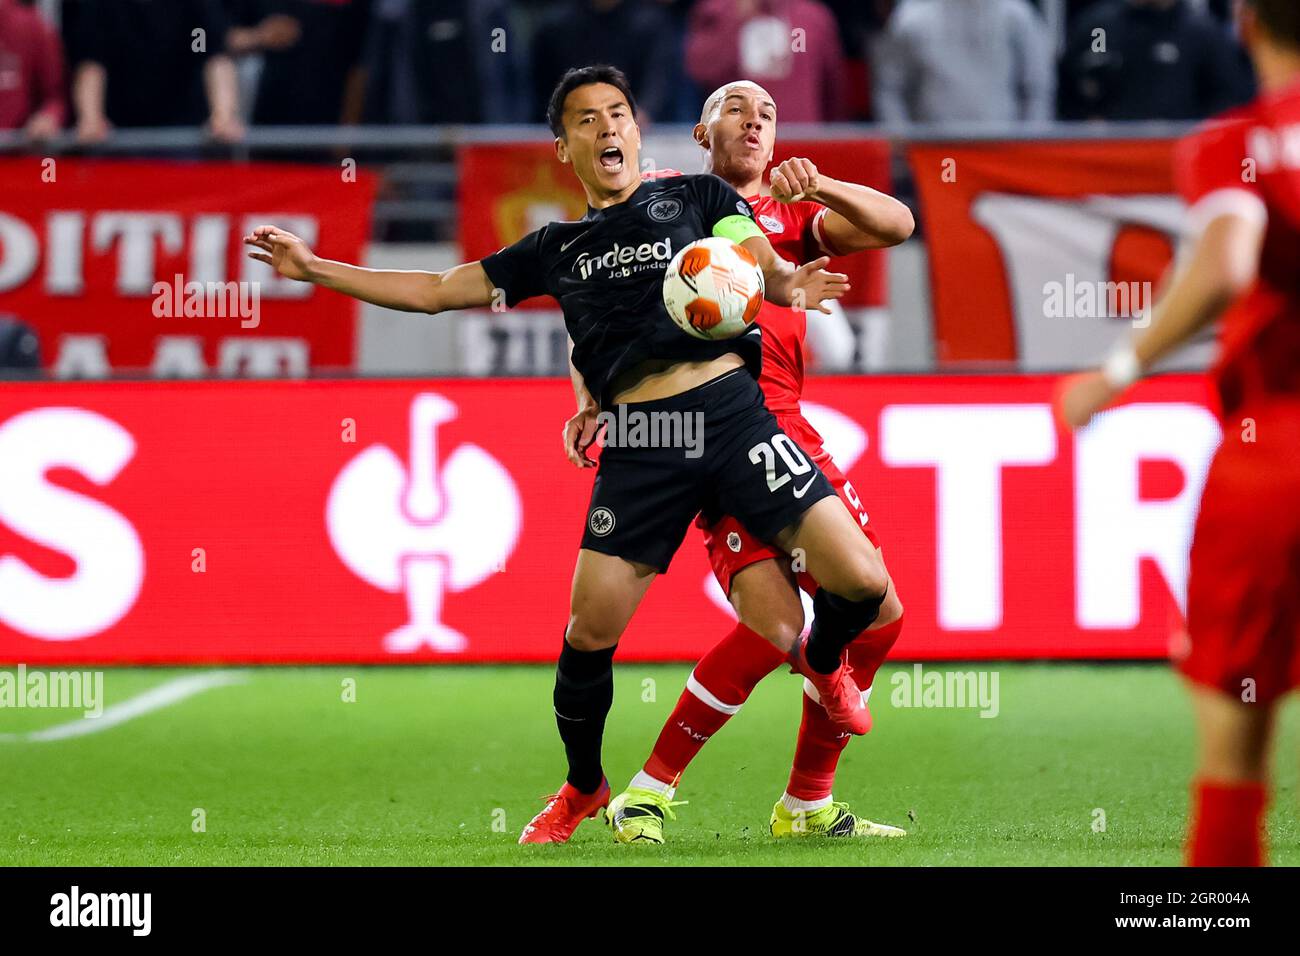 ANTWERP, BELGIUM - SEPTEMBER 30: Makoto Hasebe of Eintracht Frankfurt and Michael Frey of Royal Antwerp FC battle for possession during the UEFA Europa League Group Stage match between Royal Antwerp FC and Eintracht Frankfurt at the Bosuil on September 30, 2021 in Antwerp, Belgium (Photo by Herman Dingler/Orange Pictures) Stock Photo